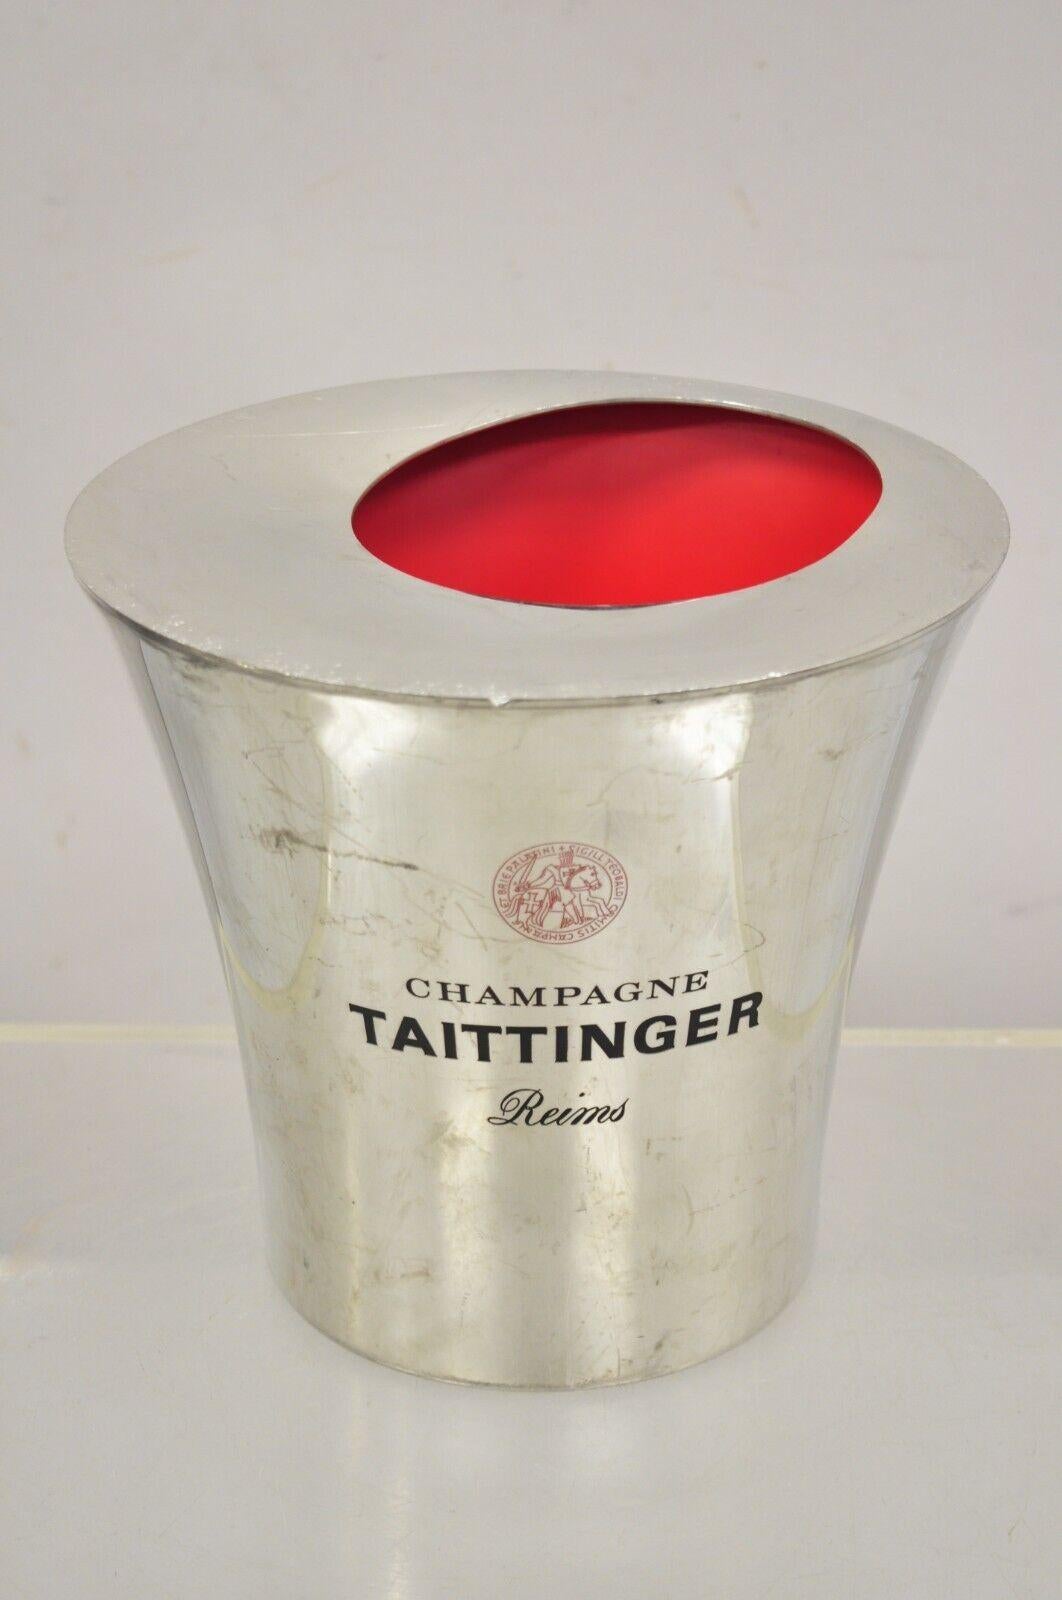 Taittinger Reims French Polished Aluminum Champagne Chiller Ice Bucket by Etain. Item features Heavy polished aluminum construction, red painted interior, shapely modernist form, original hallmarks, made in France. Circa Late 20th Century.